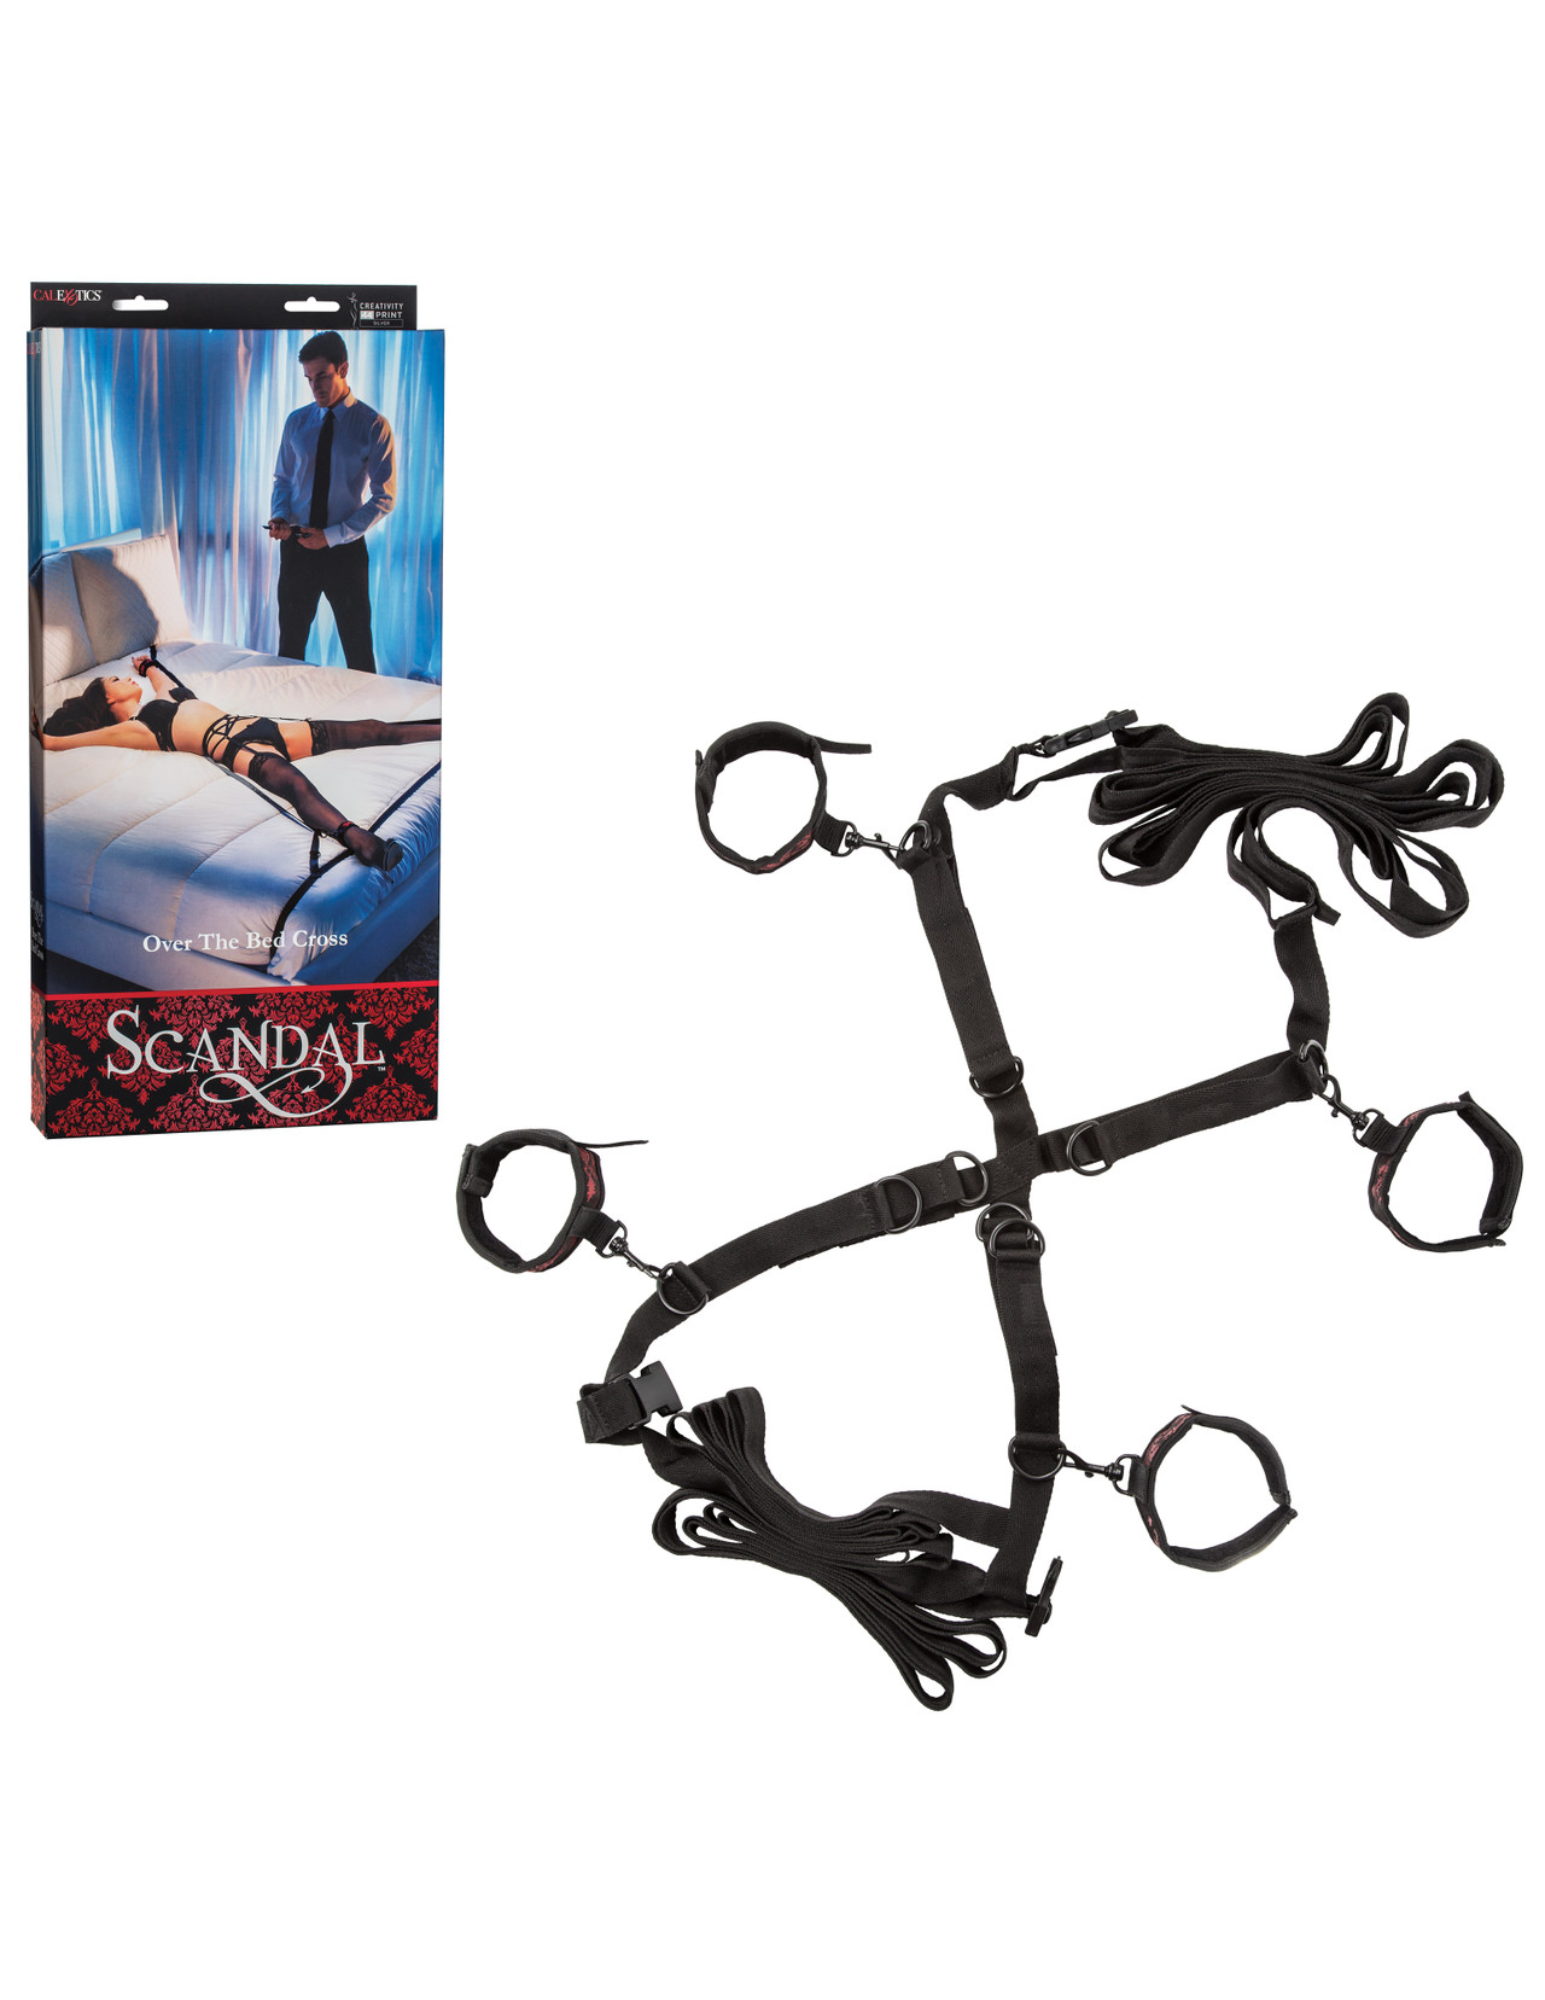 Photo of the Scandal Over the Bed Cross Restraints from CalExotics, next to its box.